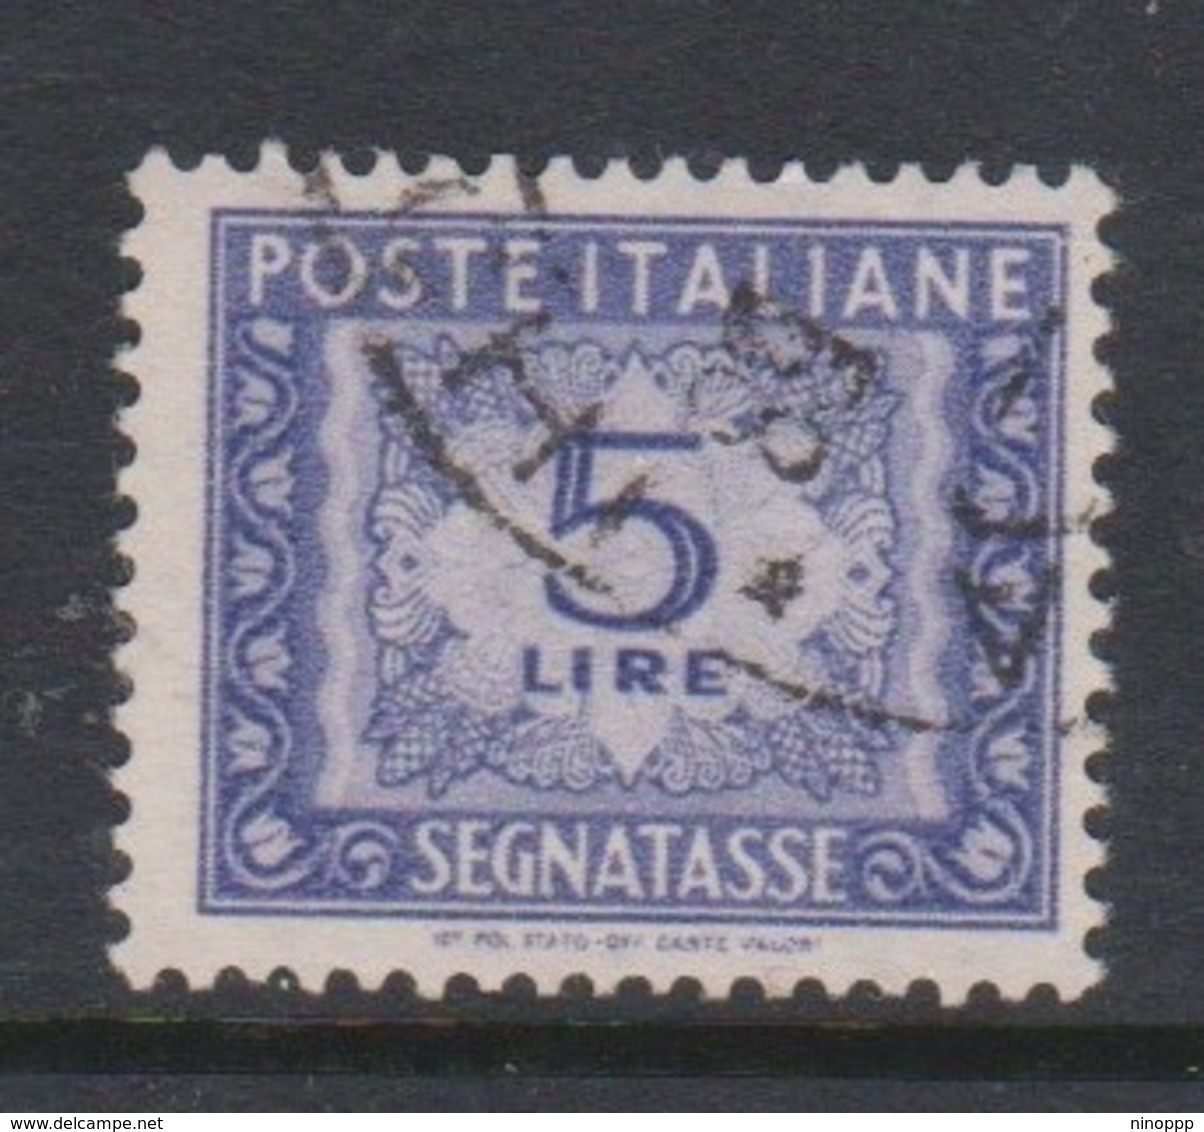 Italy PD 101 1947-54 Republic  Postage Due,watermark Flying Wheel,lire 5 Blue,used - Postage Due